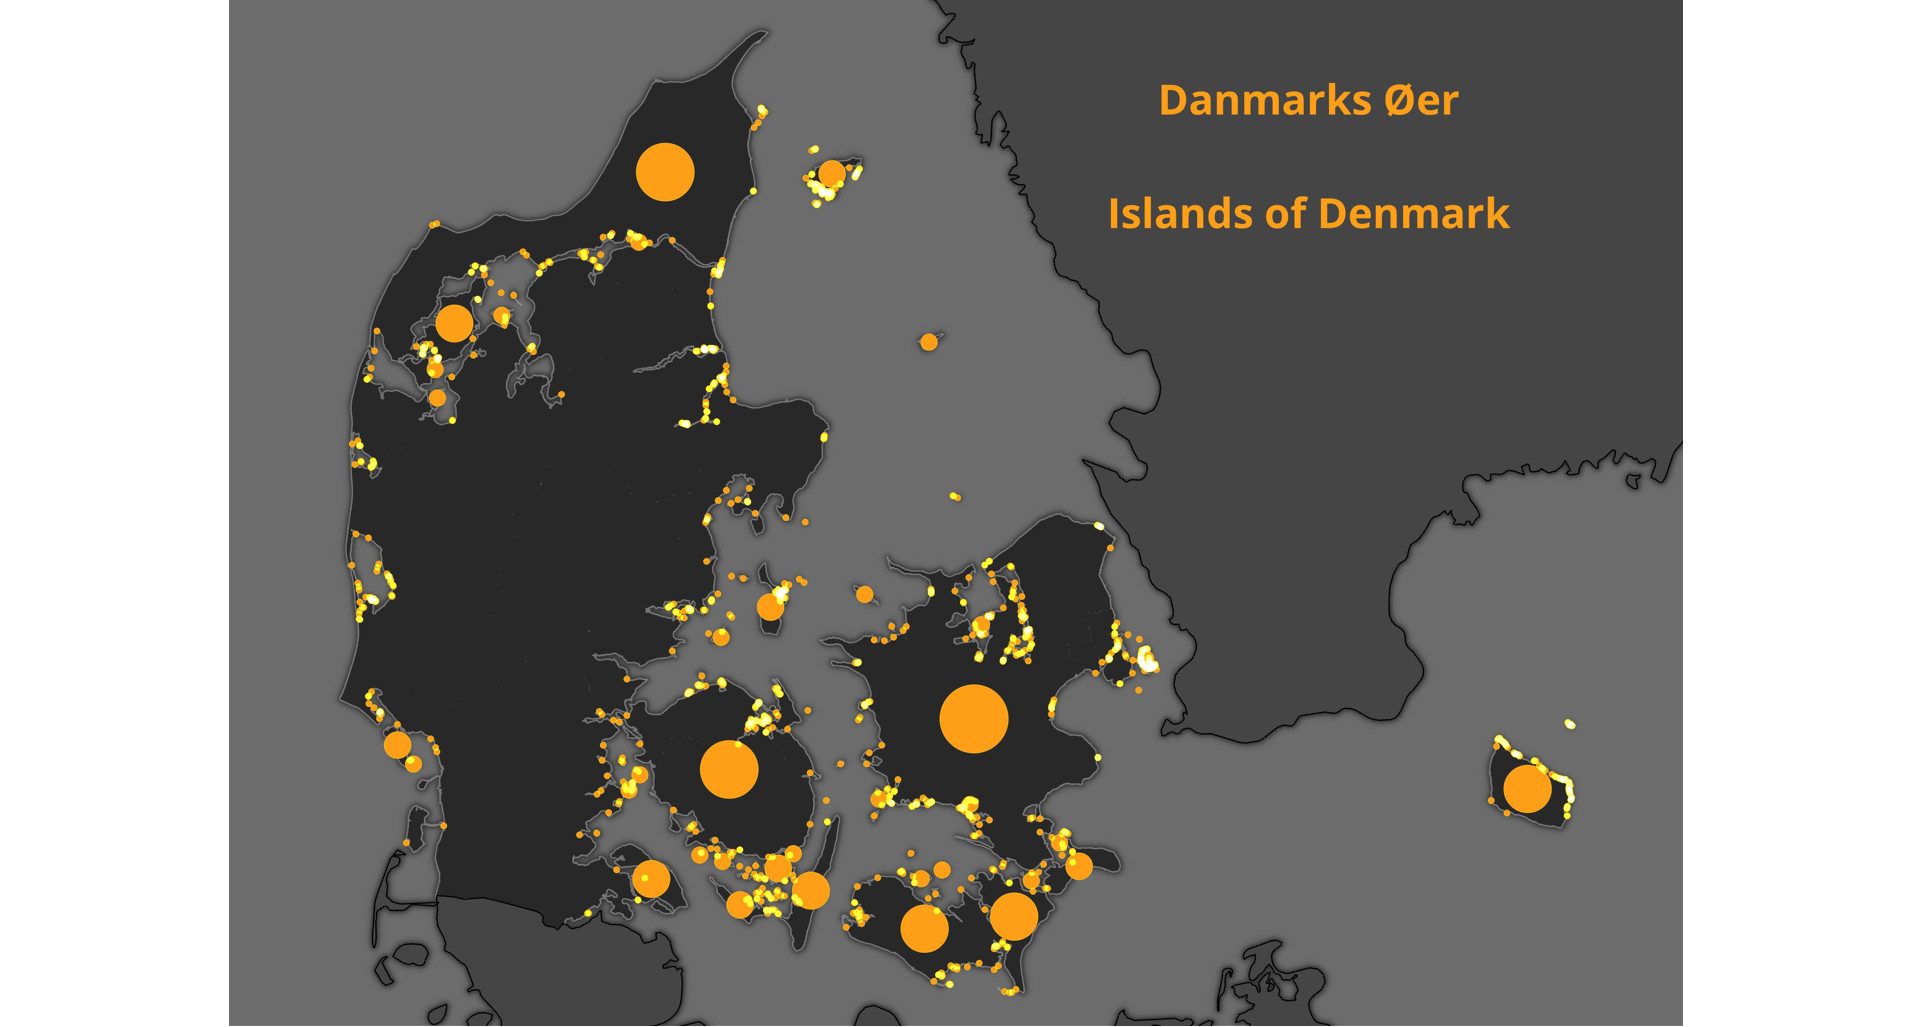 Denmarks 1400+ Islands by size, with a Halloween color scheme